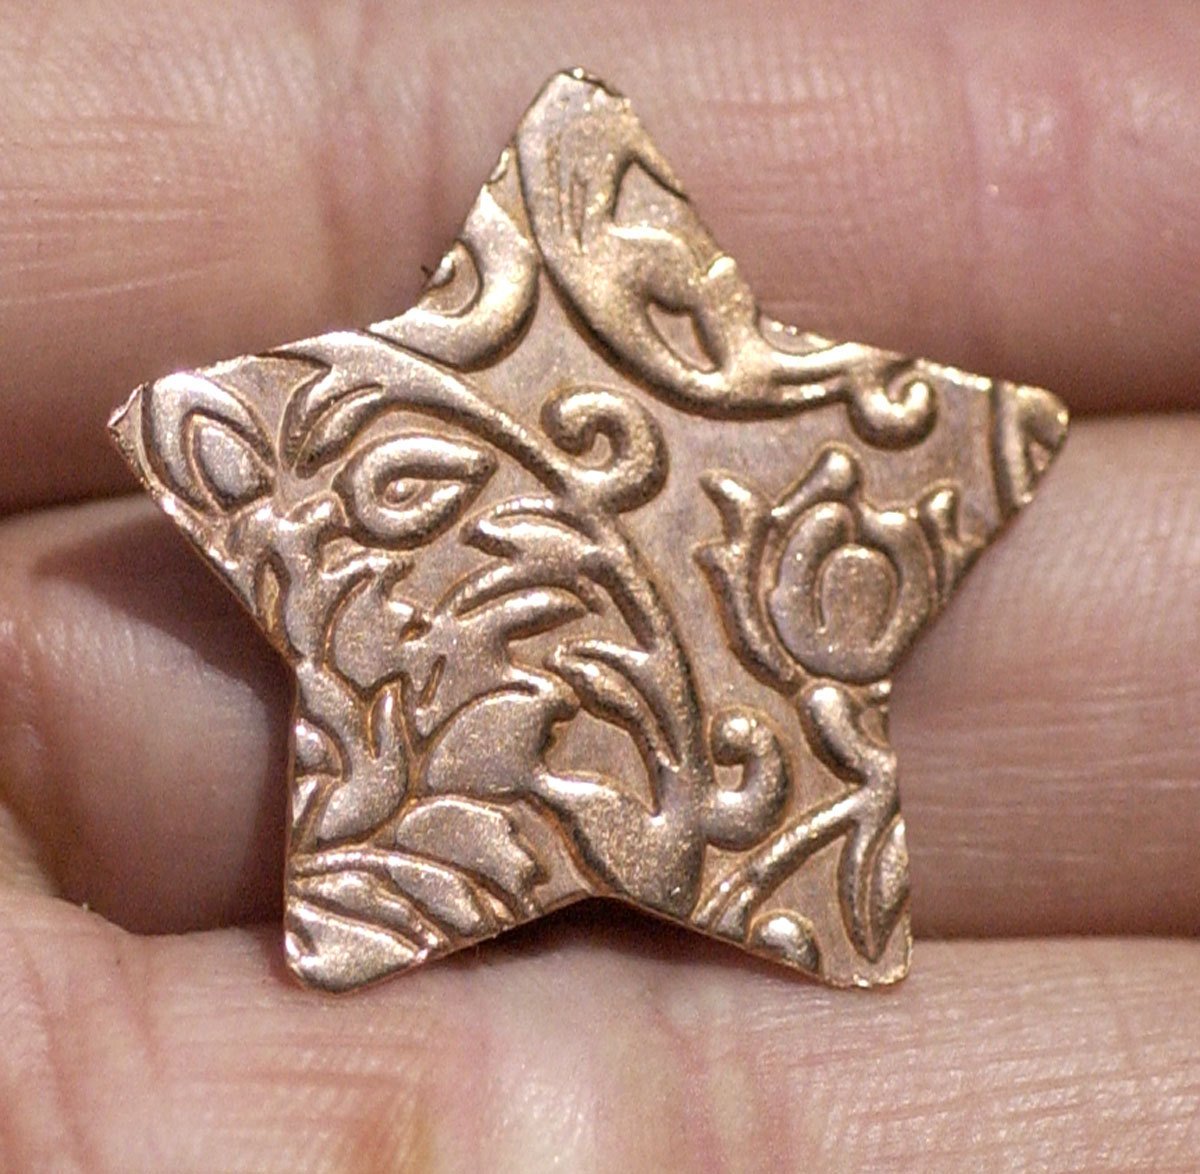 Star in Lotus Flowers 30mm 24g for Enameling Stamping Texturing Soldering Shape Charms Jewelry Making Variety of Metals